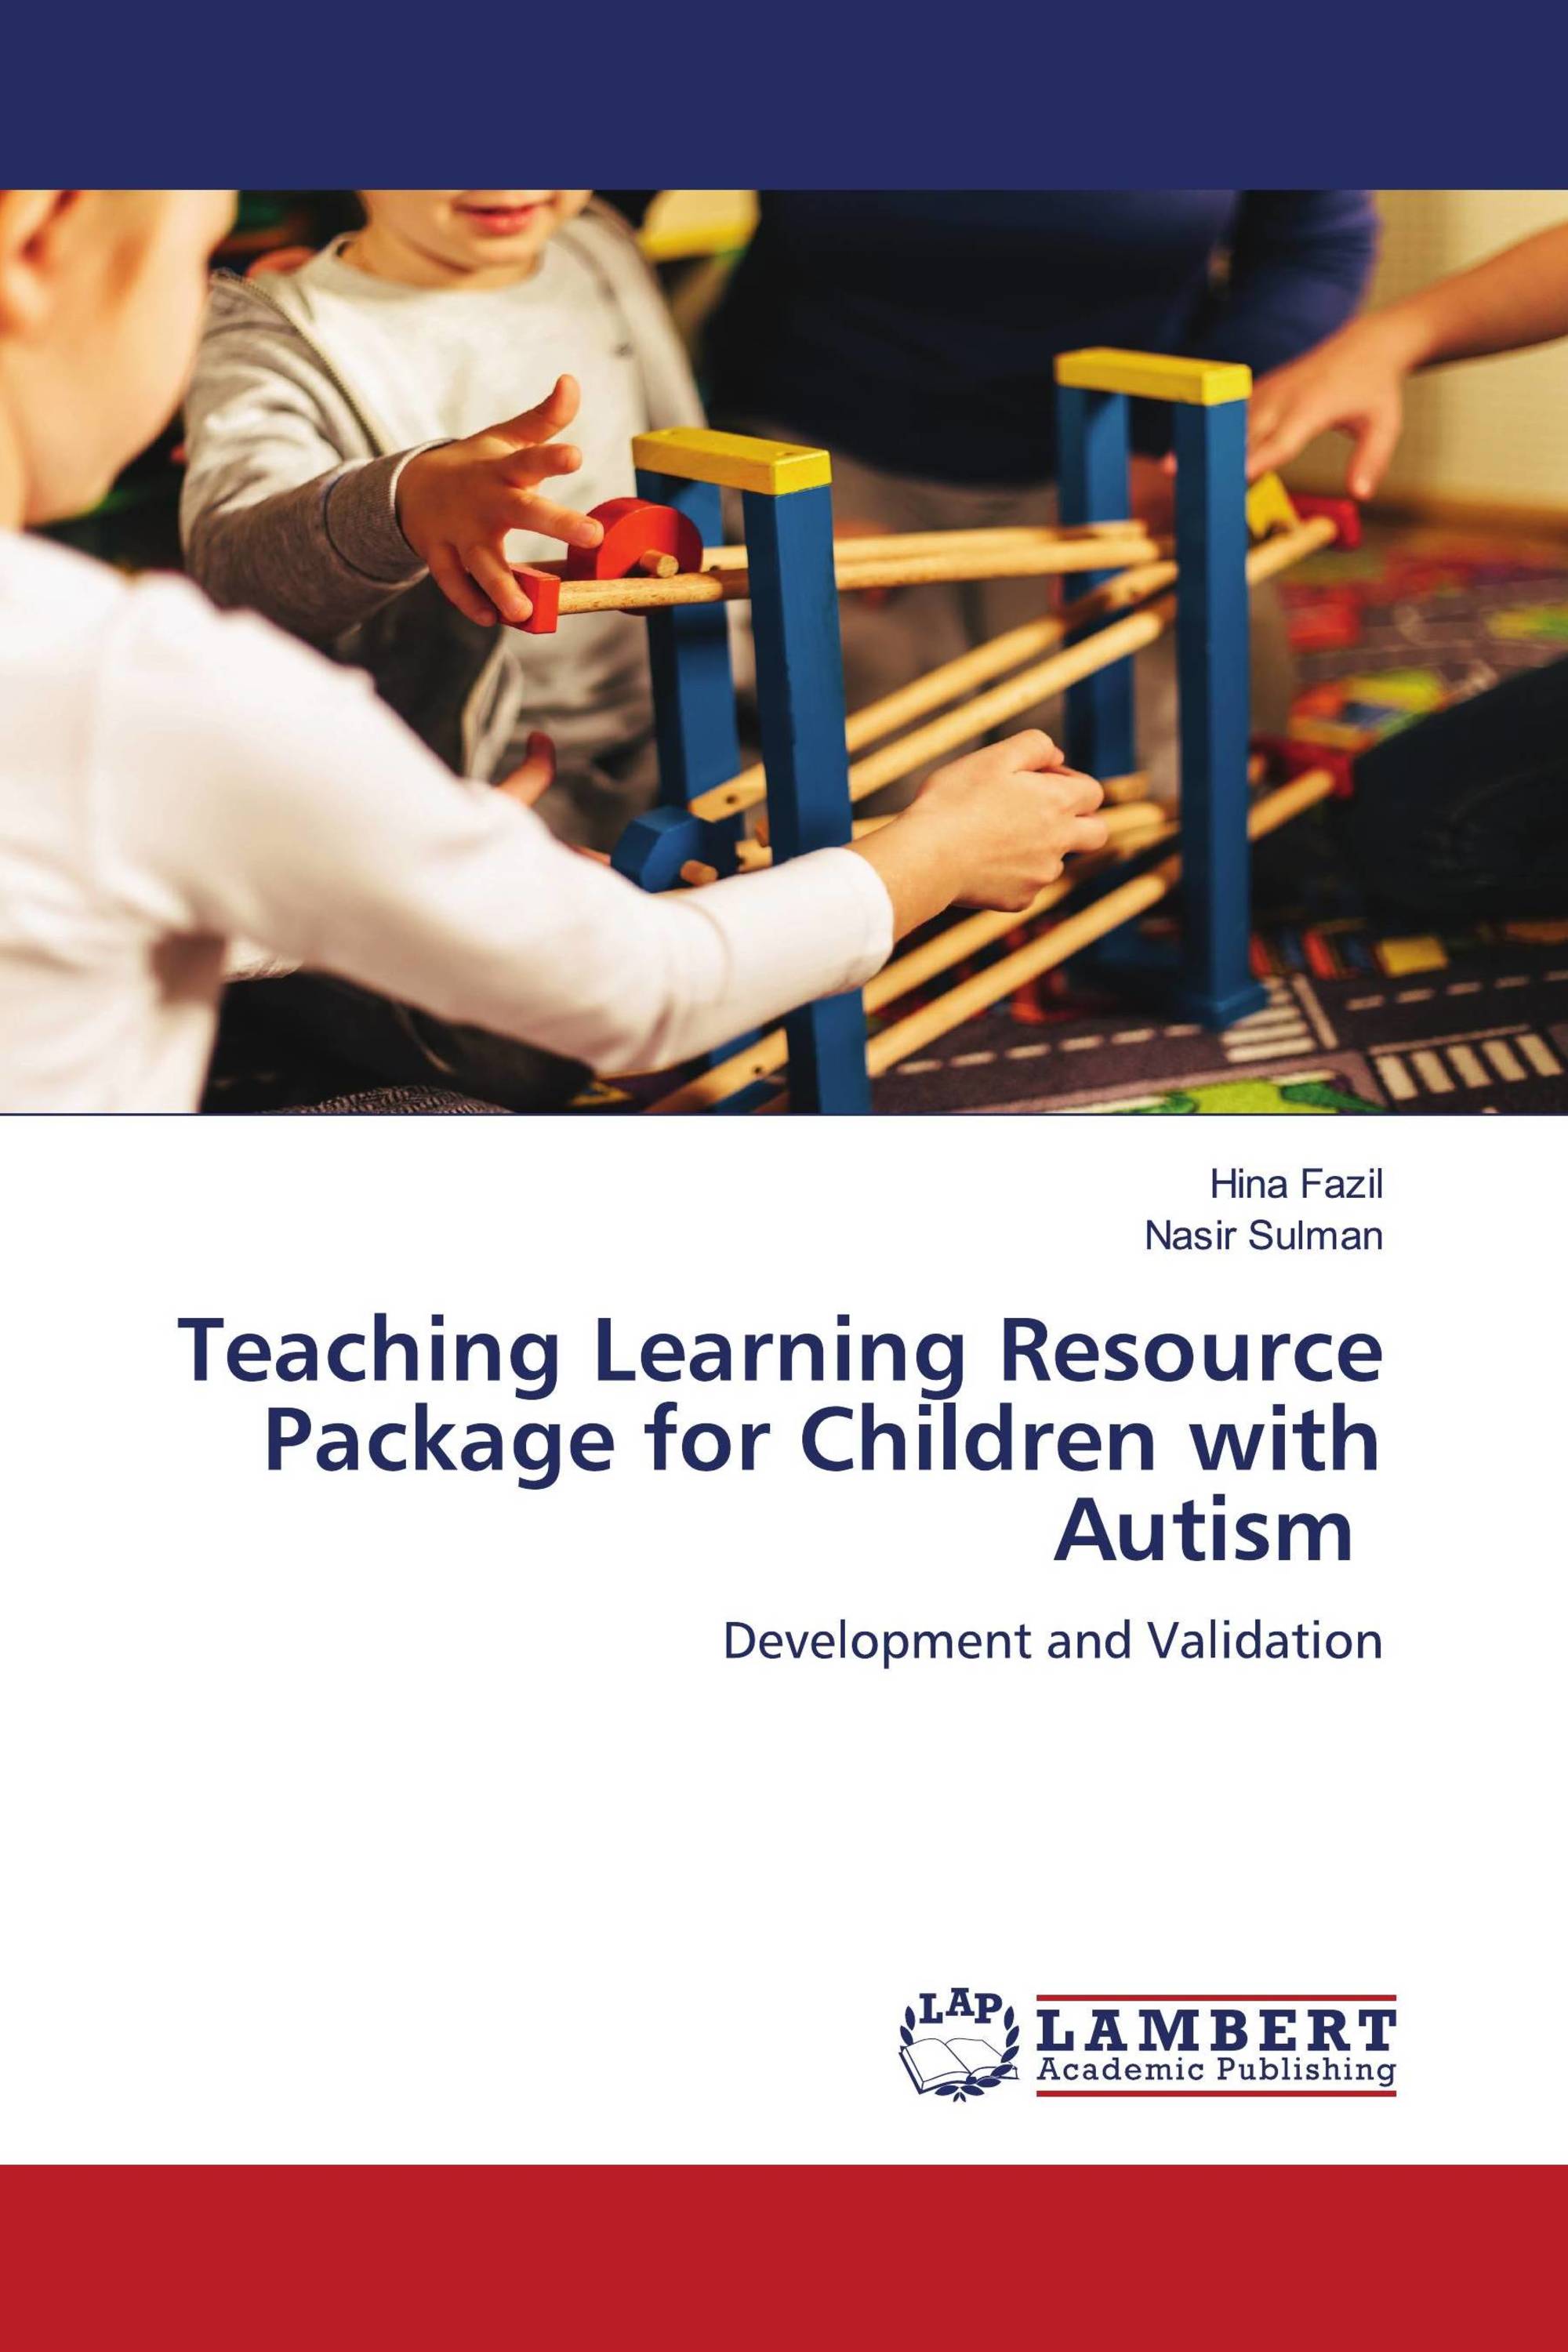 Teaching Learning Resource Package for Children with Autism / 978-620-5 ...